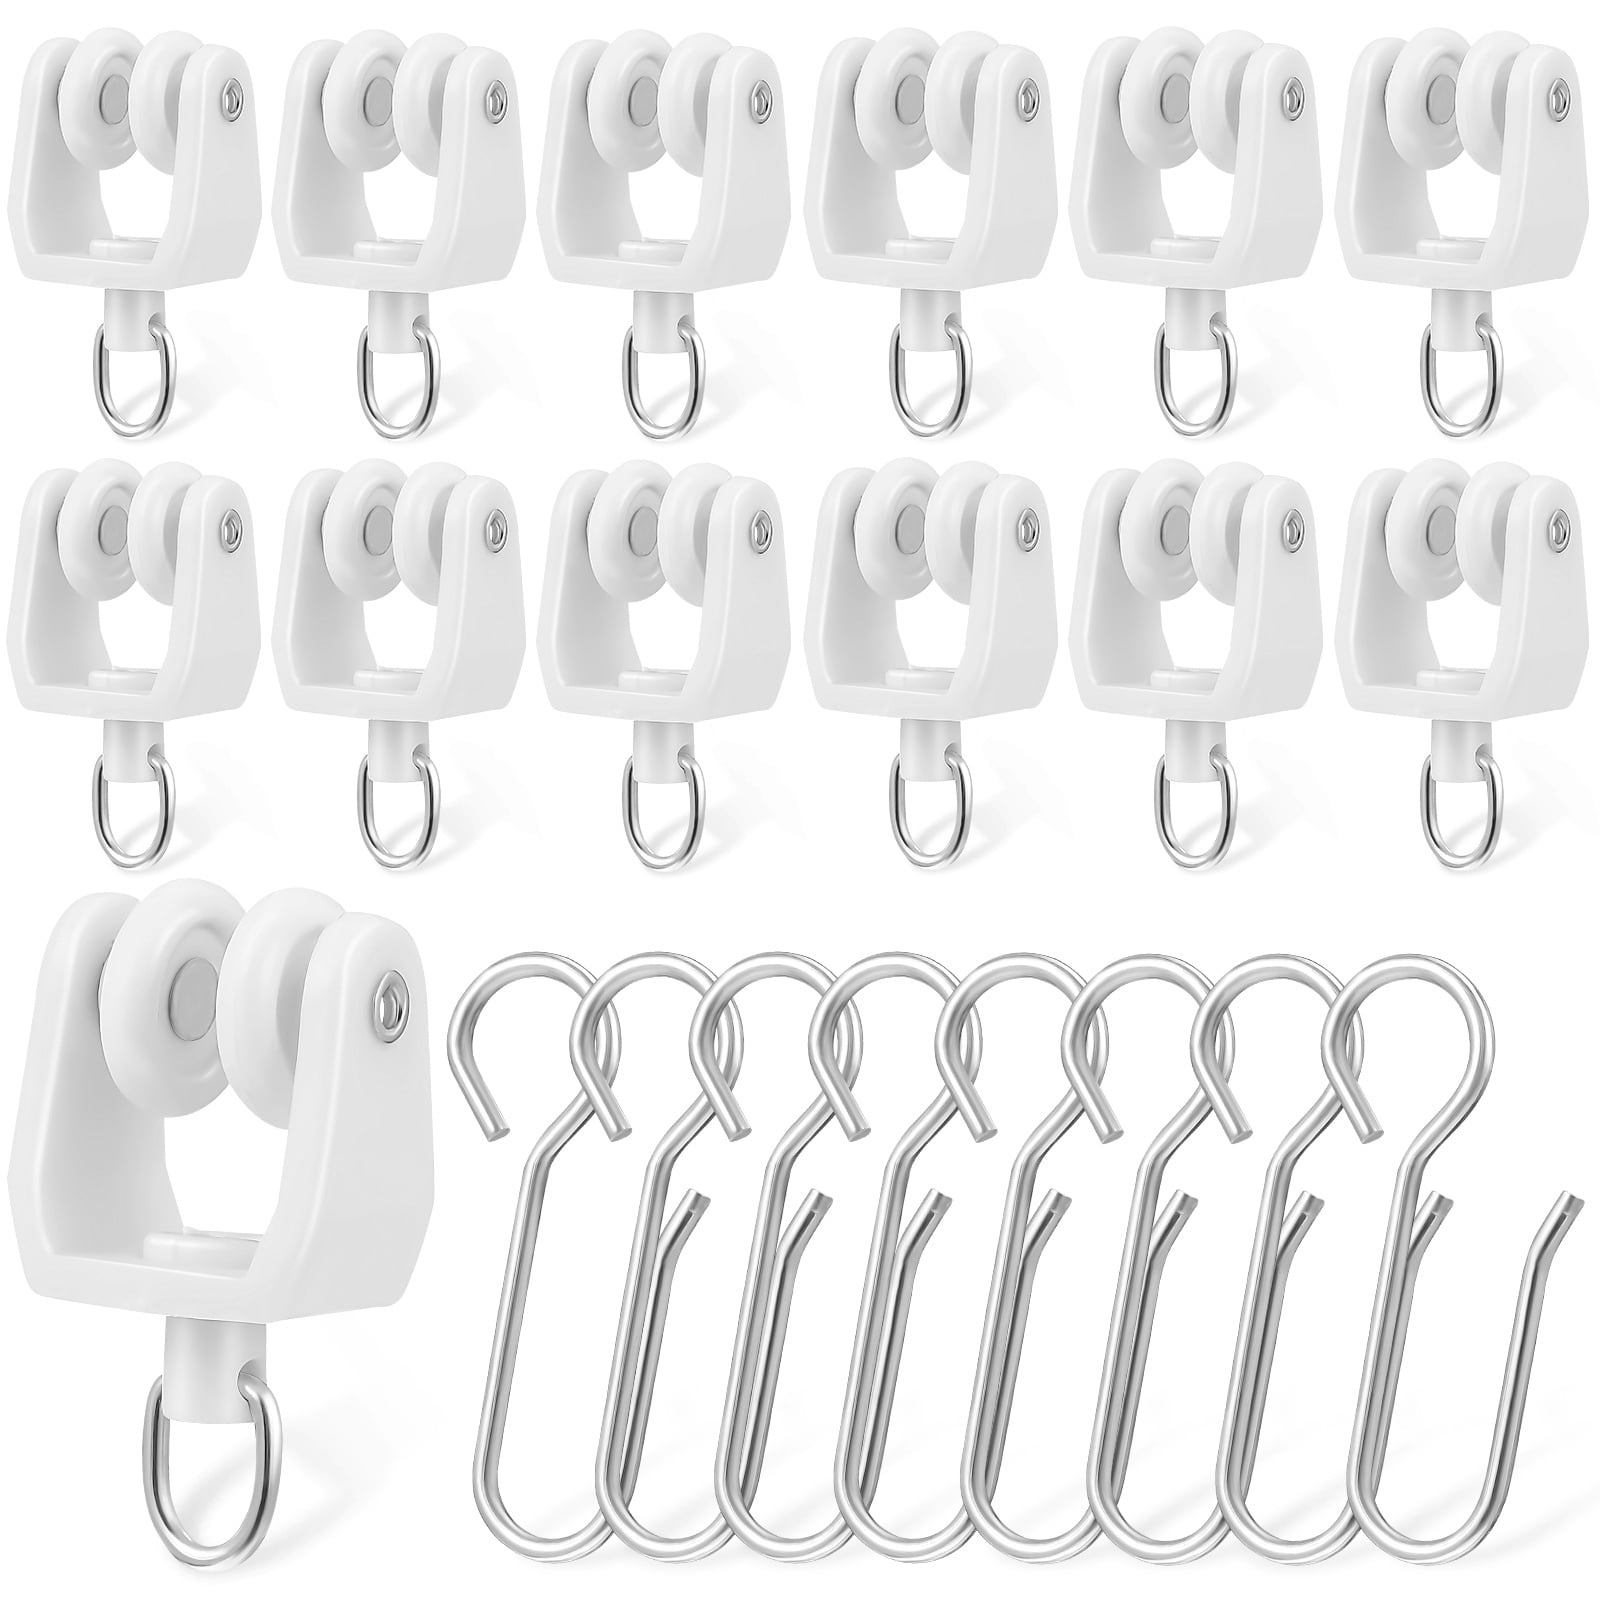 Standard Carrier Roller Hooks (One 10 Pack) fits our Hospital Curtain Track